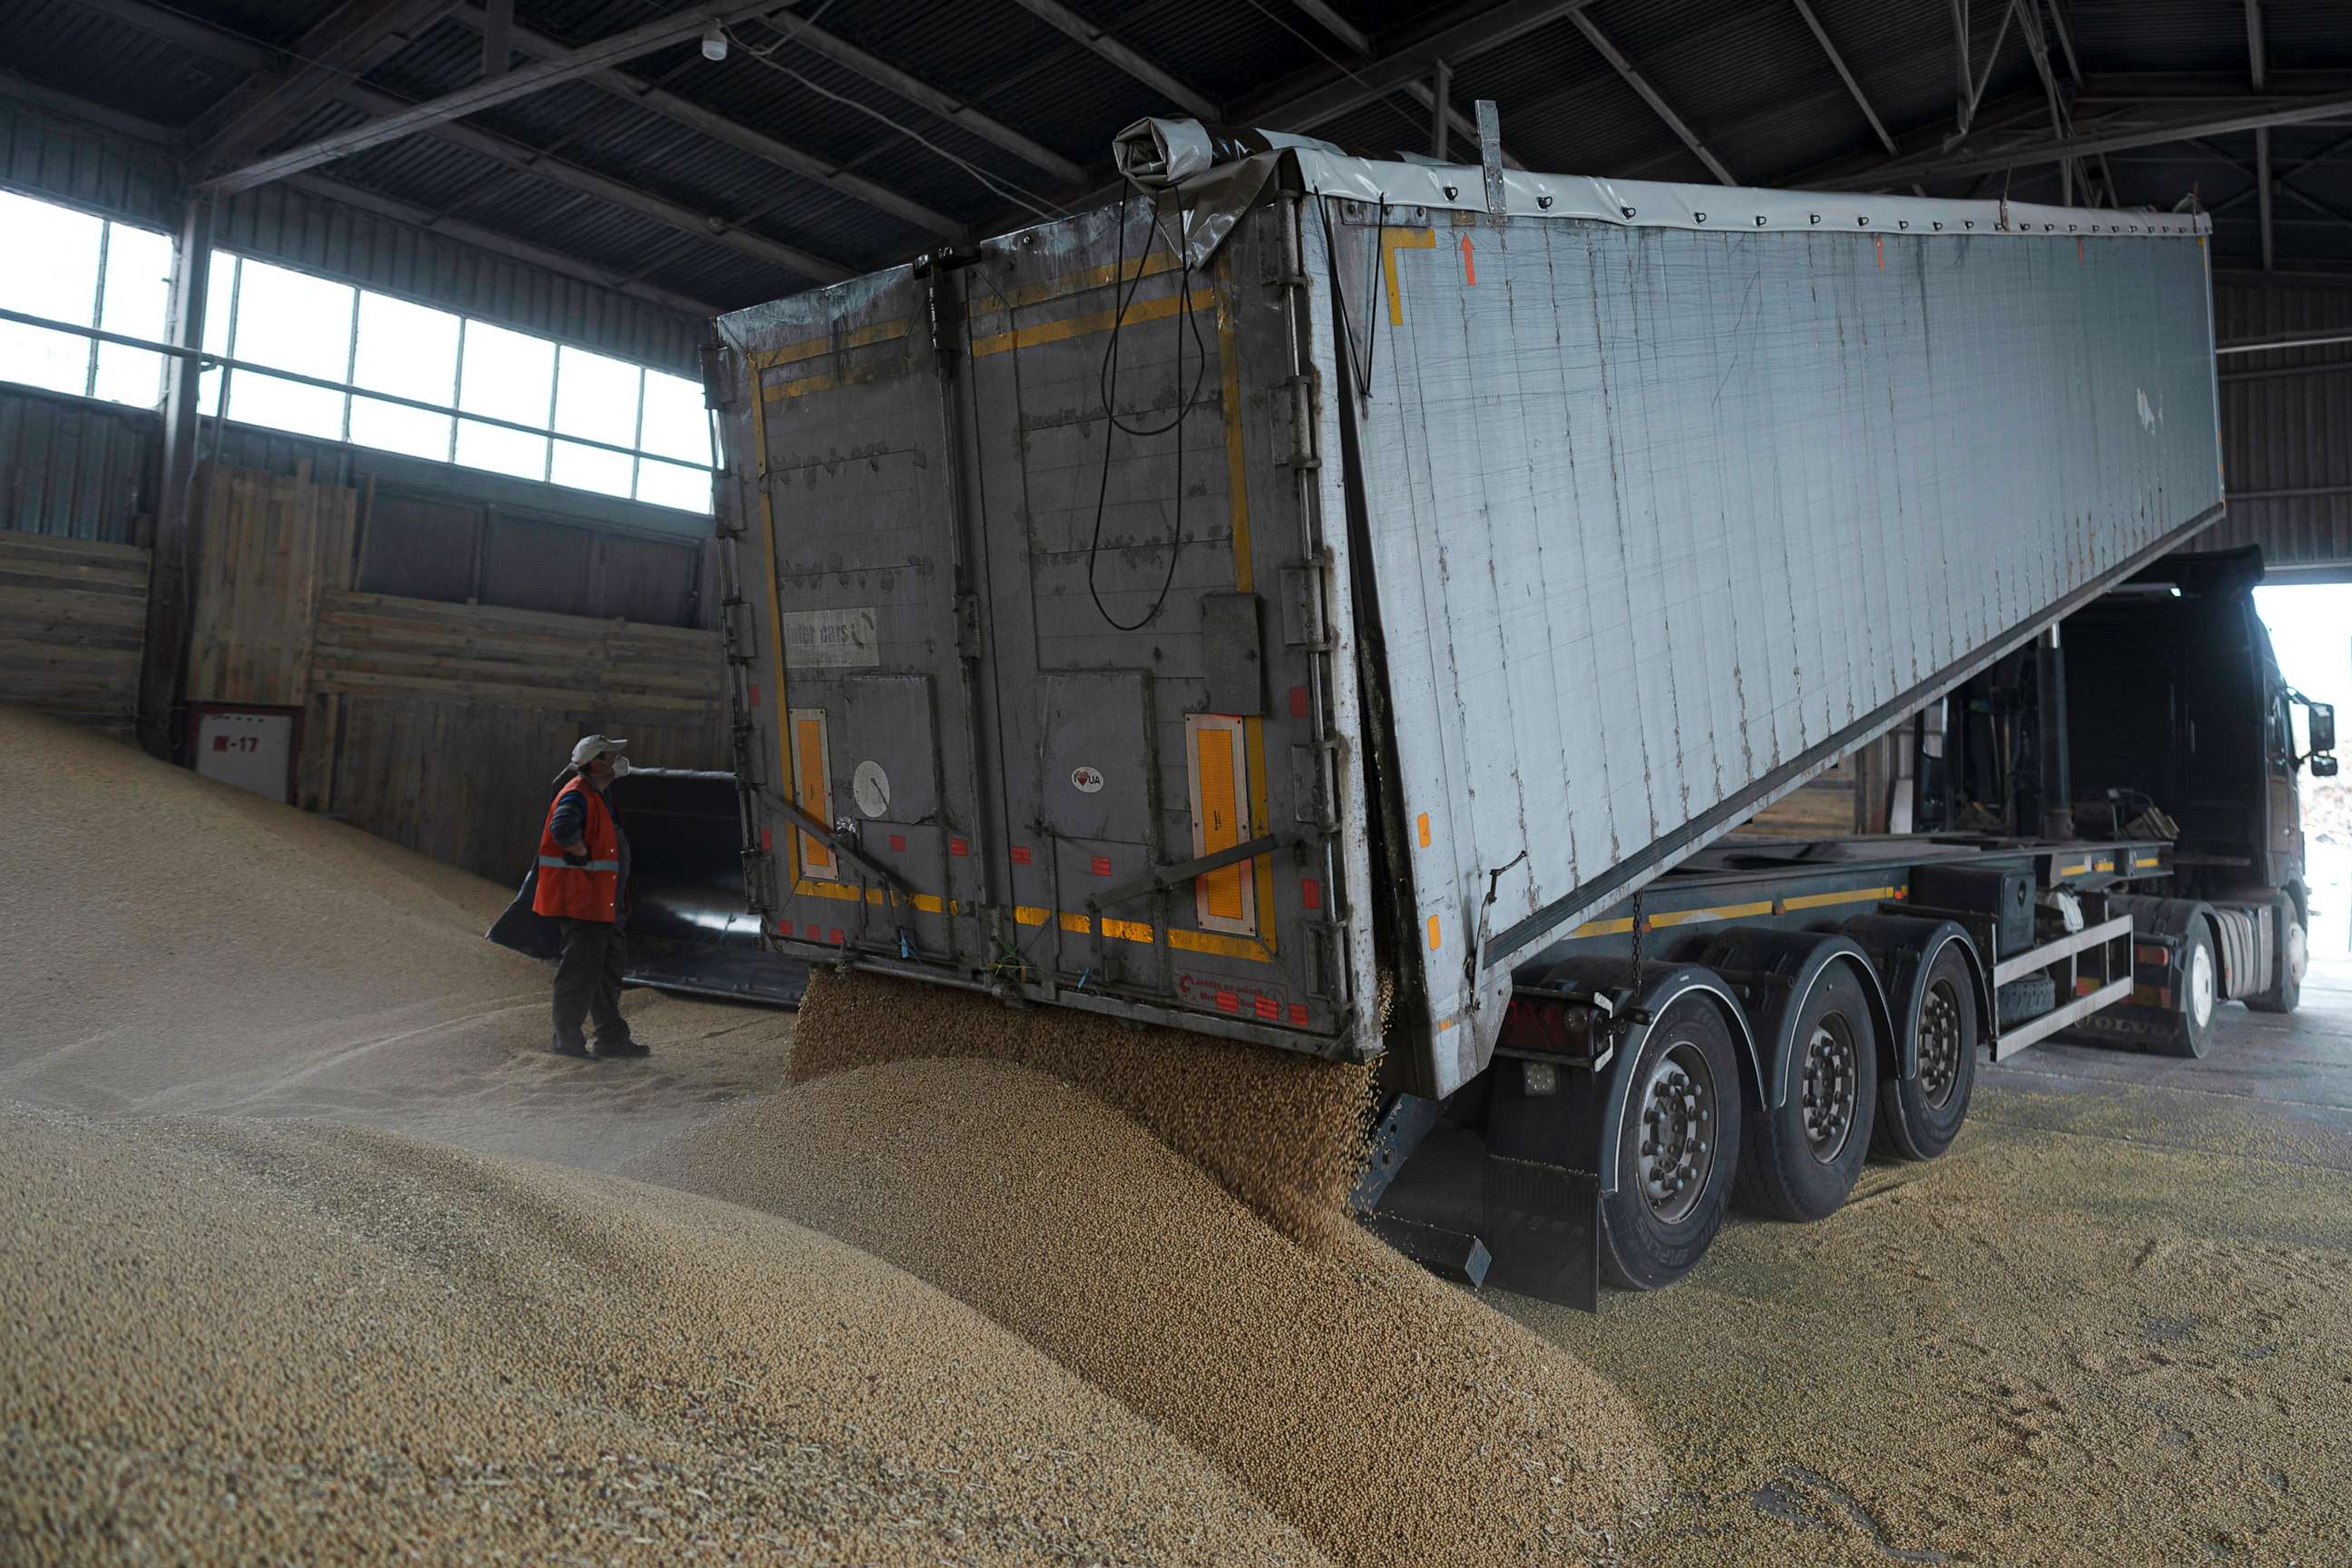 PHOTO: A truck unloads grain at a grain port in Izmail, Ukraine, April 26, 2023. U.S. and European officials have toured Ukraine's southern port of Izmail, a facility that is important in bringing Ukrainian grain exports to the world.